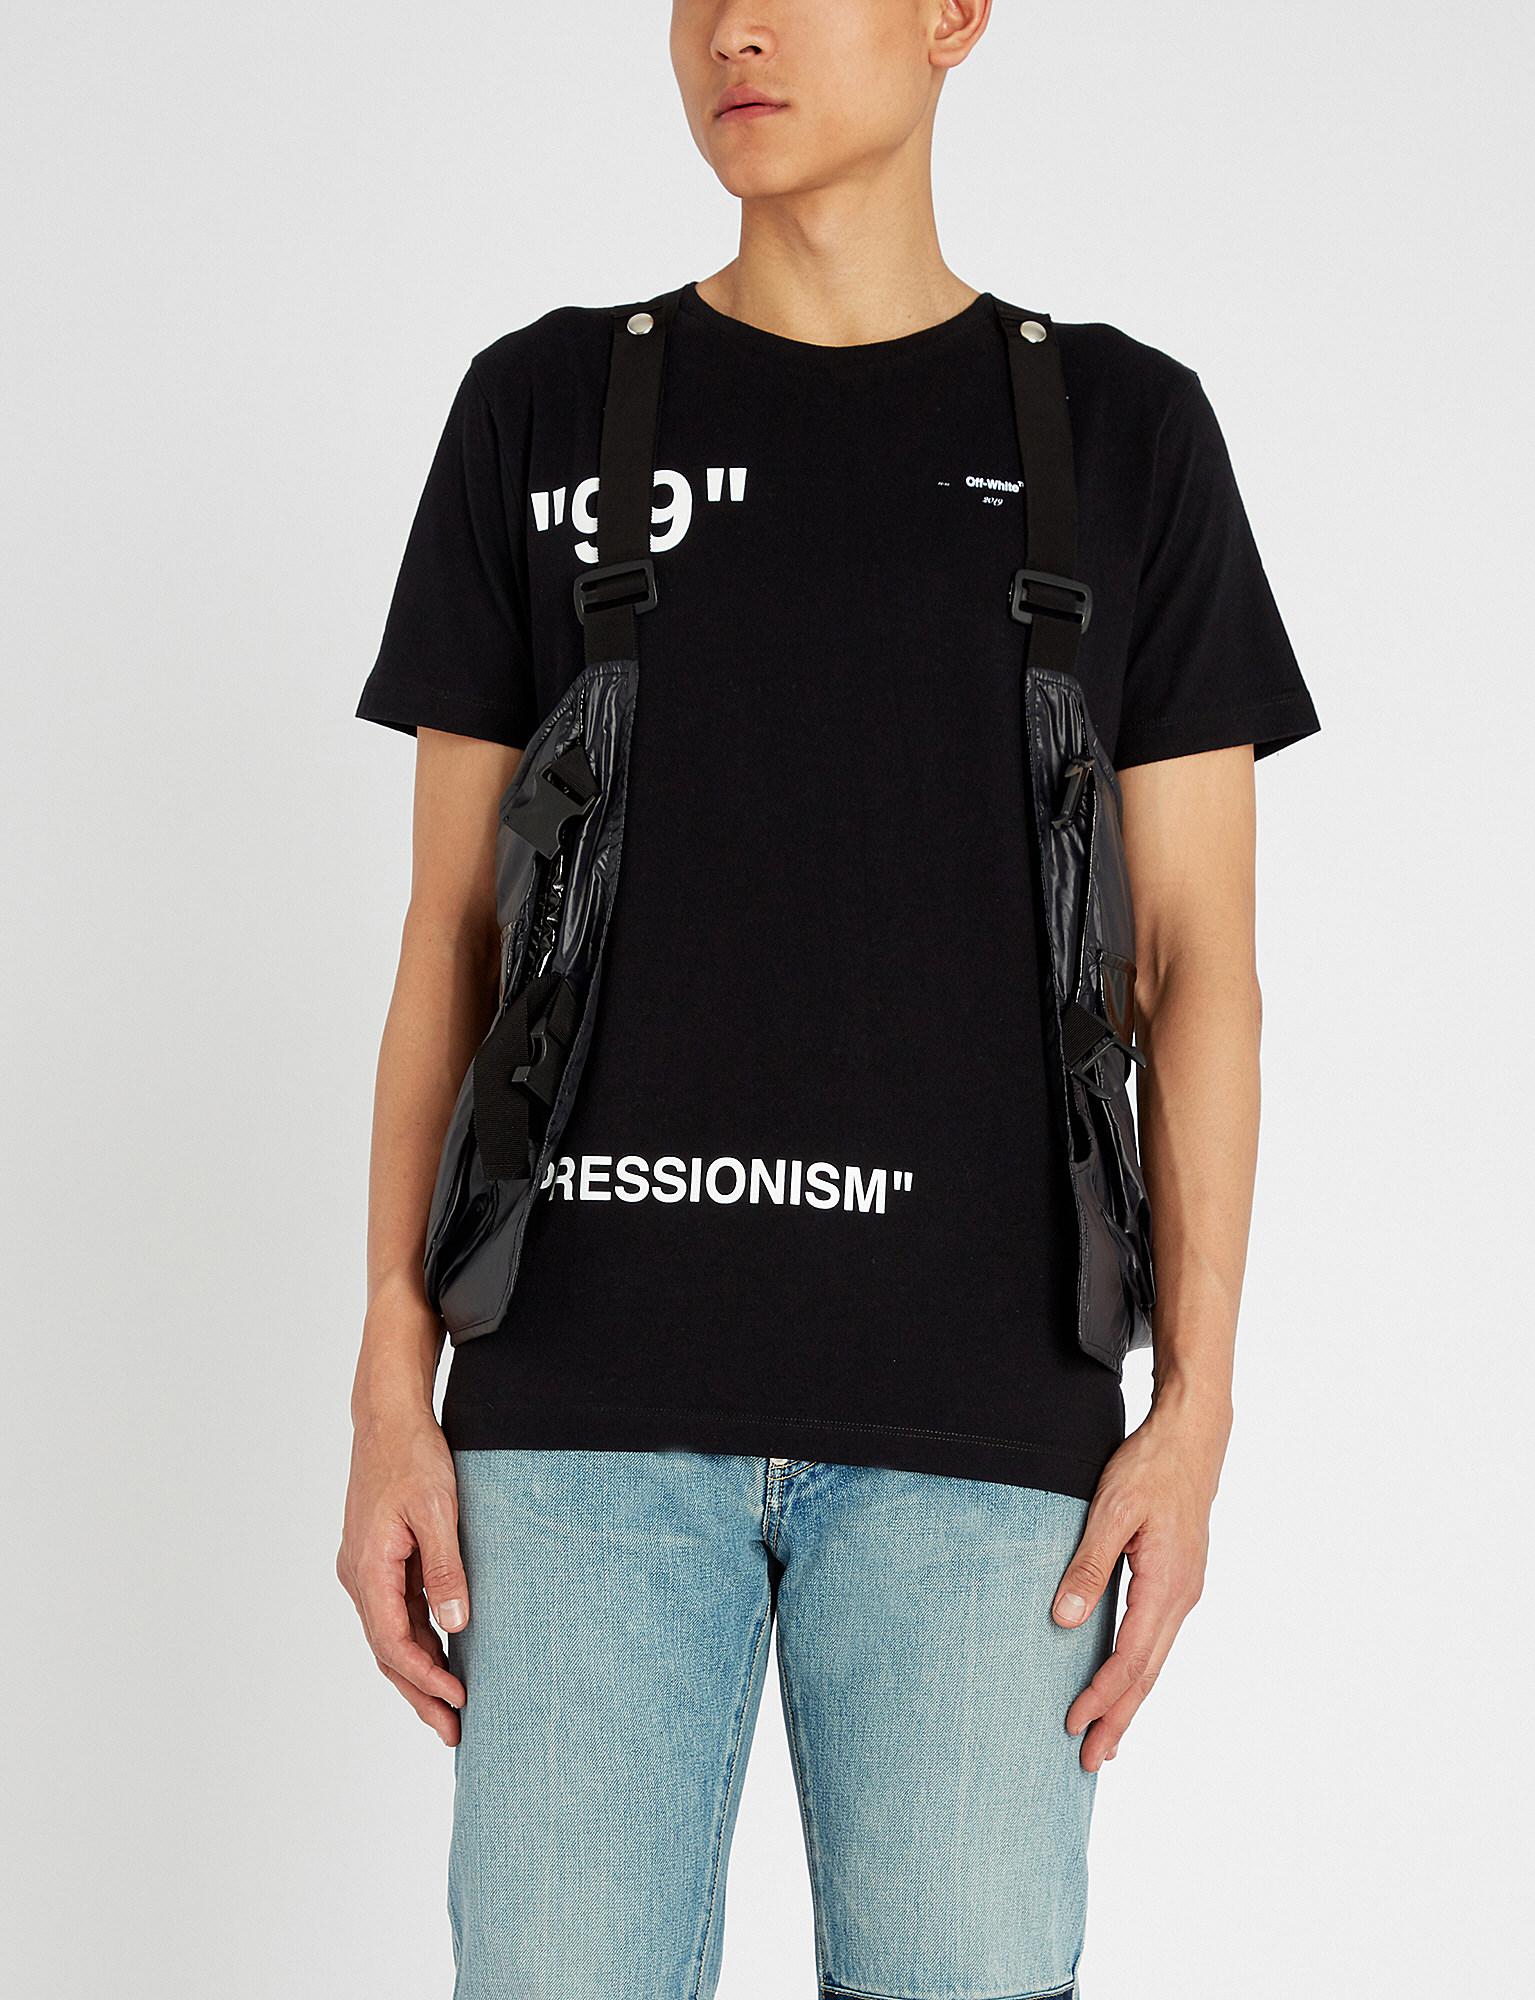 Lyst - Off-White C/O Virgil Abloh Iceman Graphic-print Cotton-jersey T-shirt in Black for Men